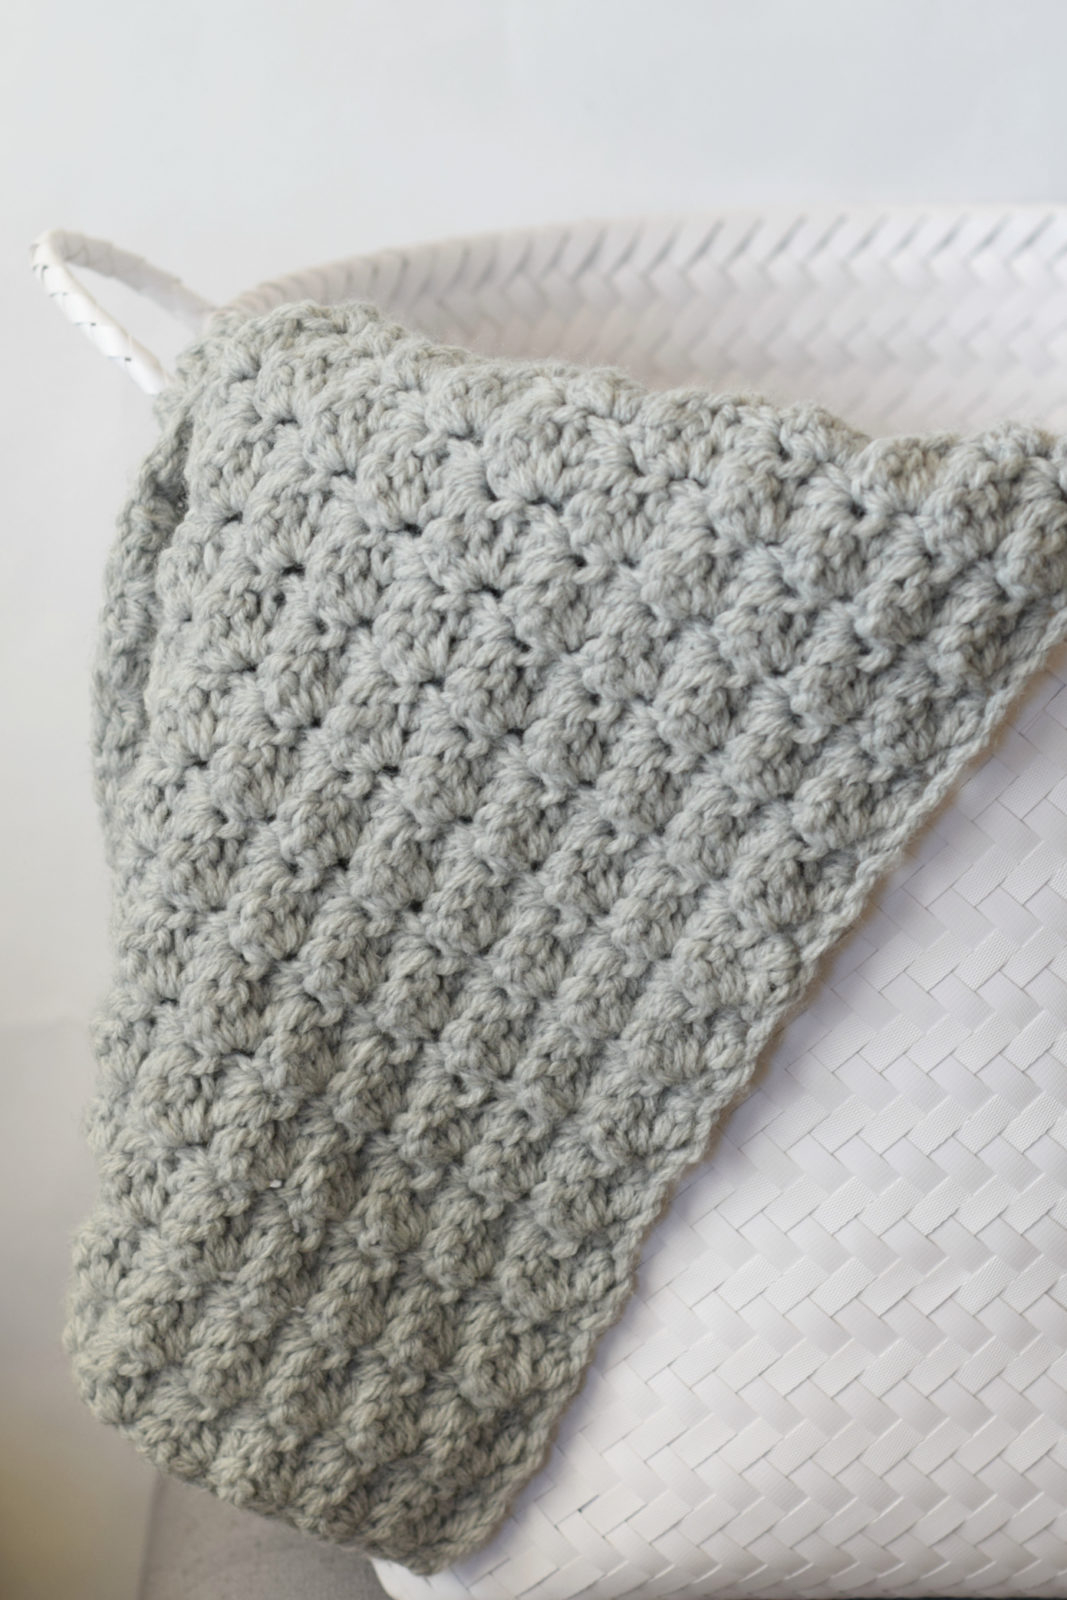 Crochet Baby Afghan Patterns Simple Crocheted Blanket Go To Pattern Mama In A Stitch